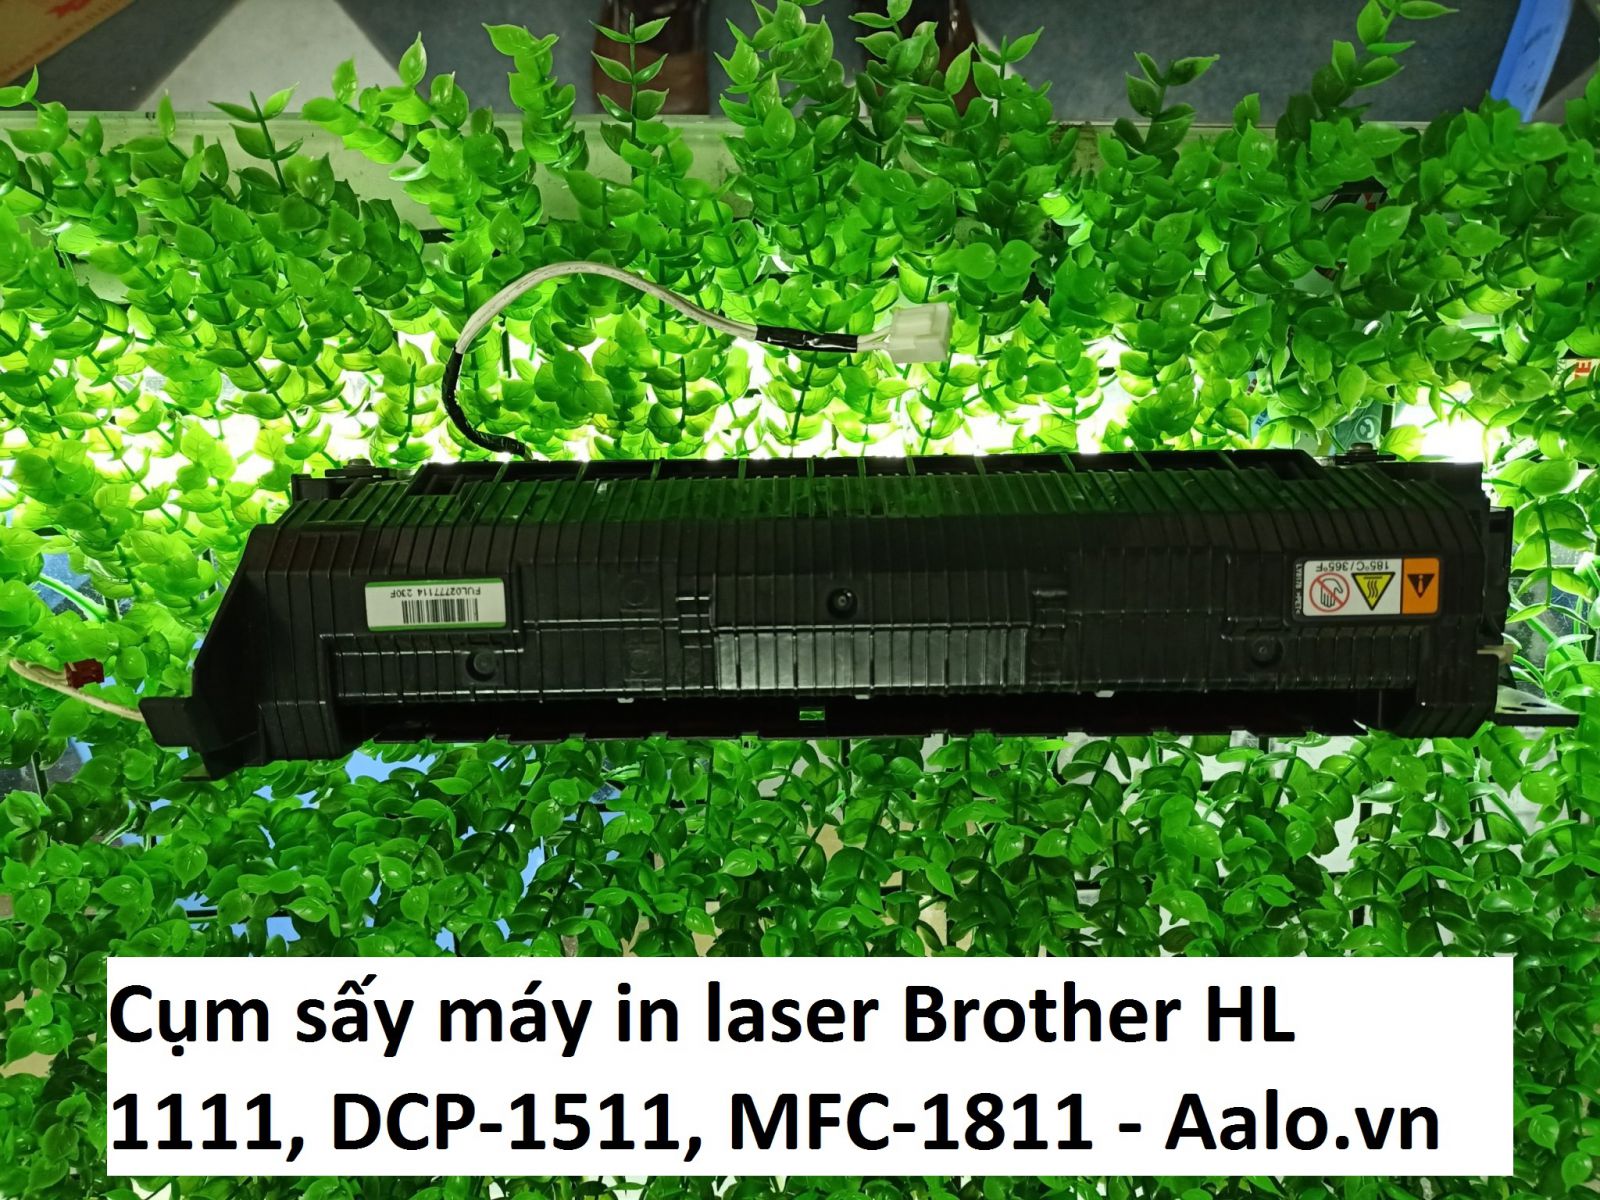 Cụm sấy máy in laser Brother HL 1111, DCP-1511, MFC-1811 - Aalo.vn